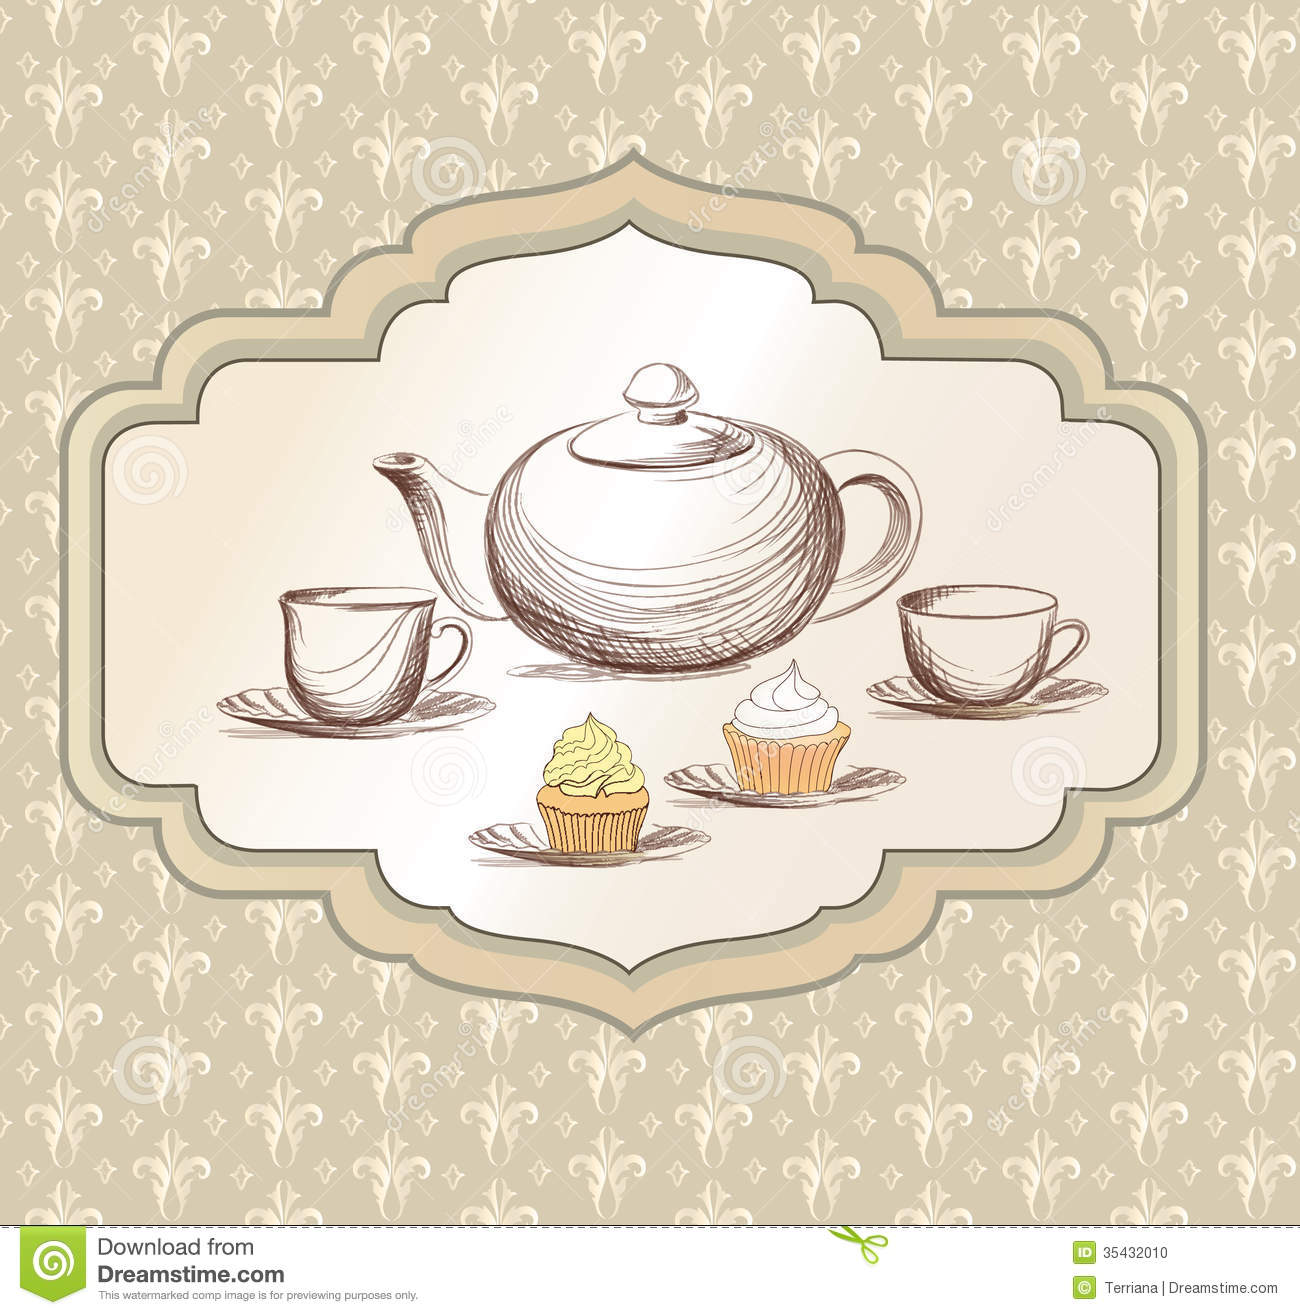 Tea Cup And Pot Label In Vintage Style On Floral Seamless Victorian